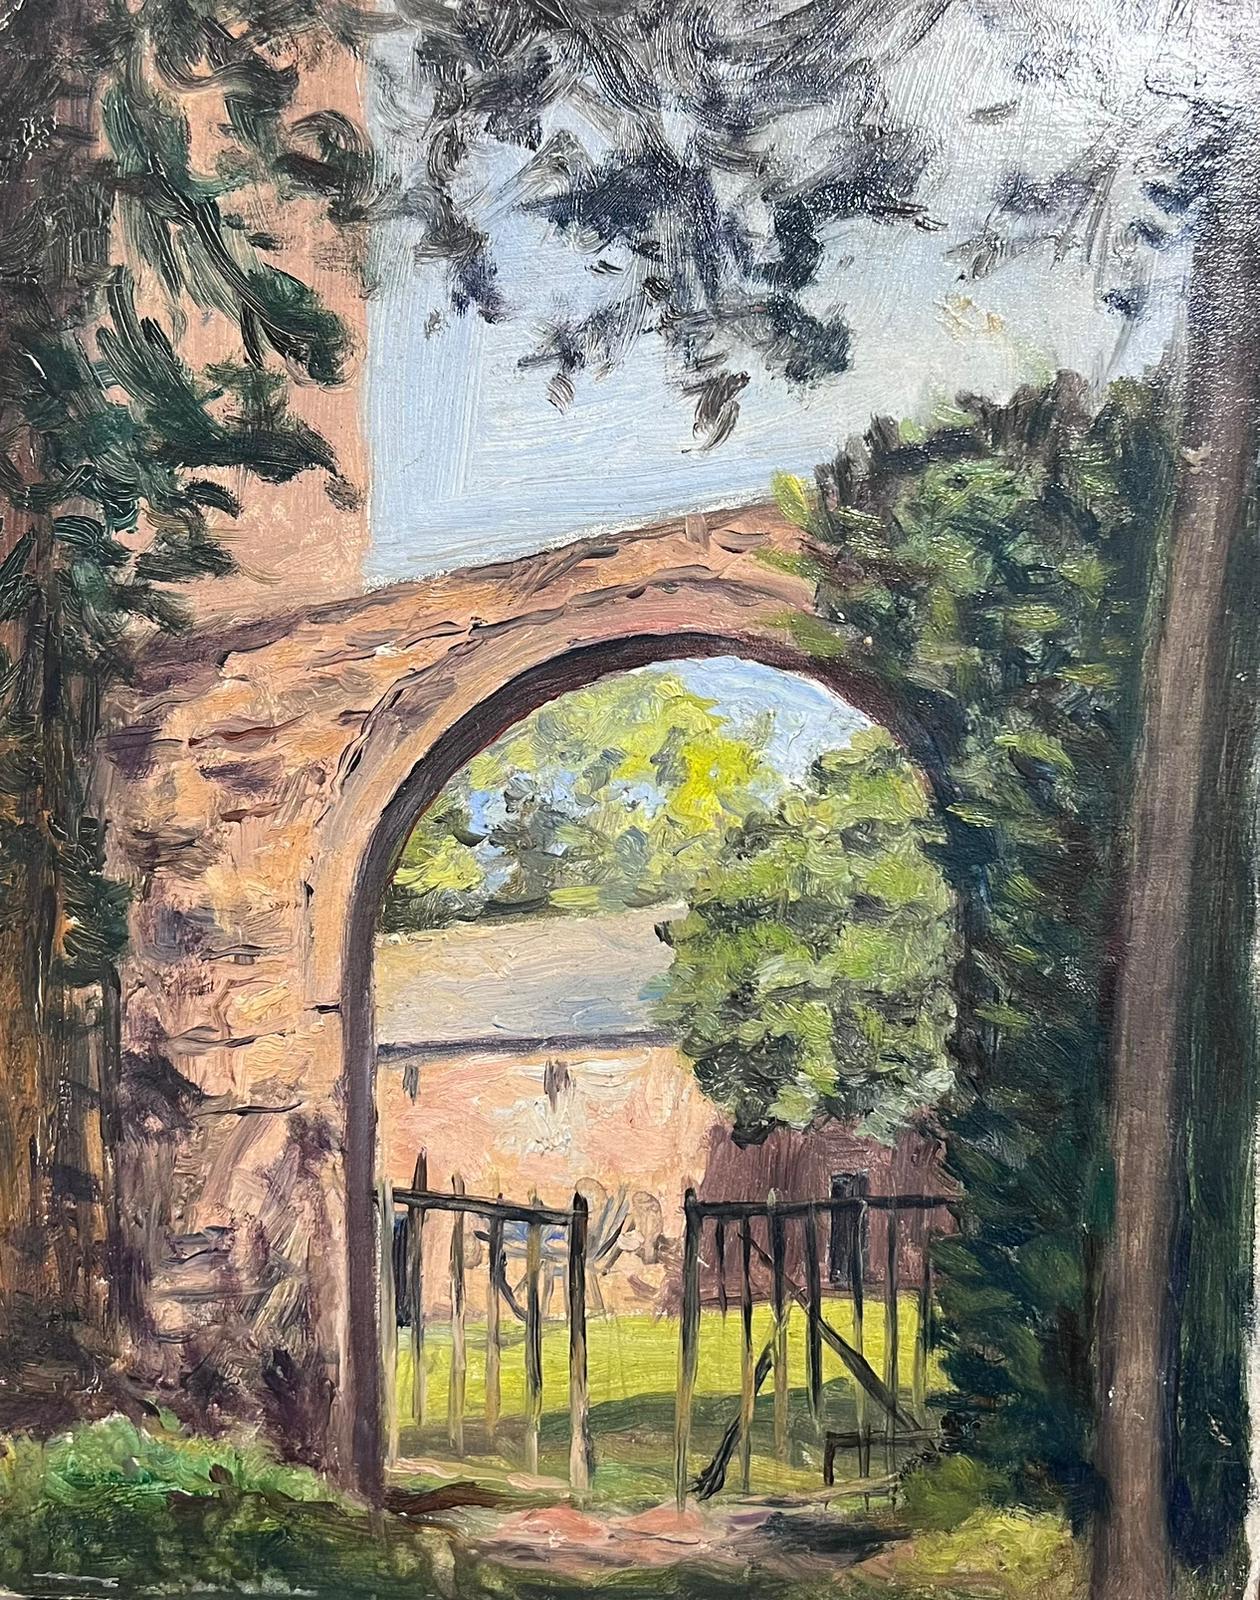 The Archway
French School, mid 20th century
oil on board, unframed
board: 9.5 x 7.5 inches
provenance: private collection
condition: very good and sound condition